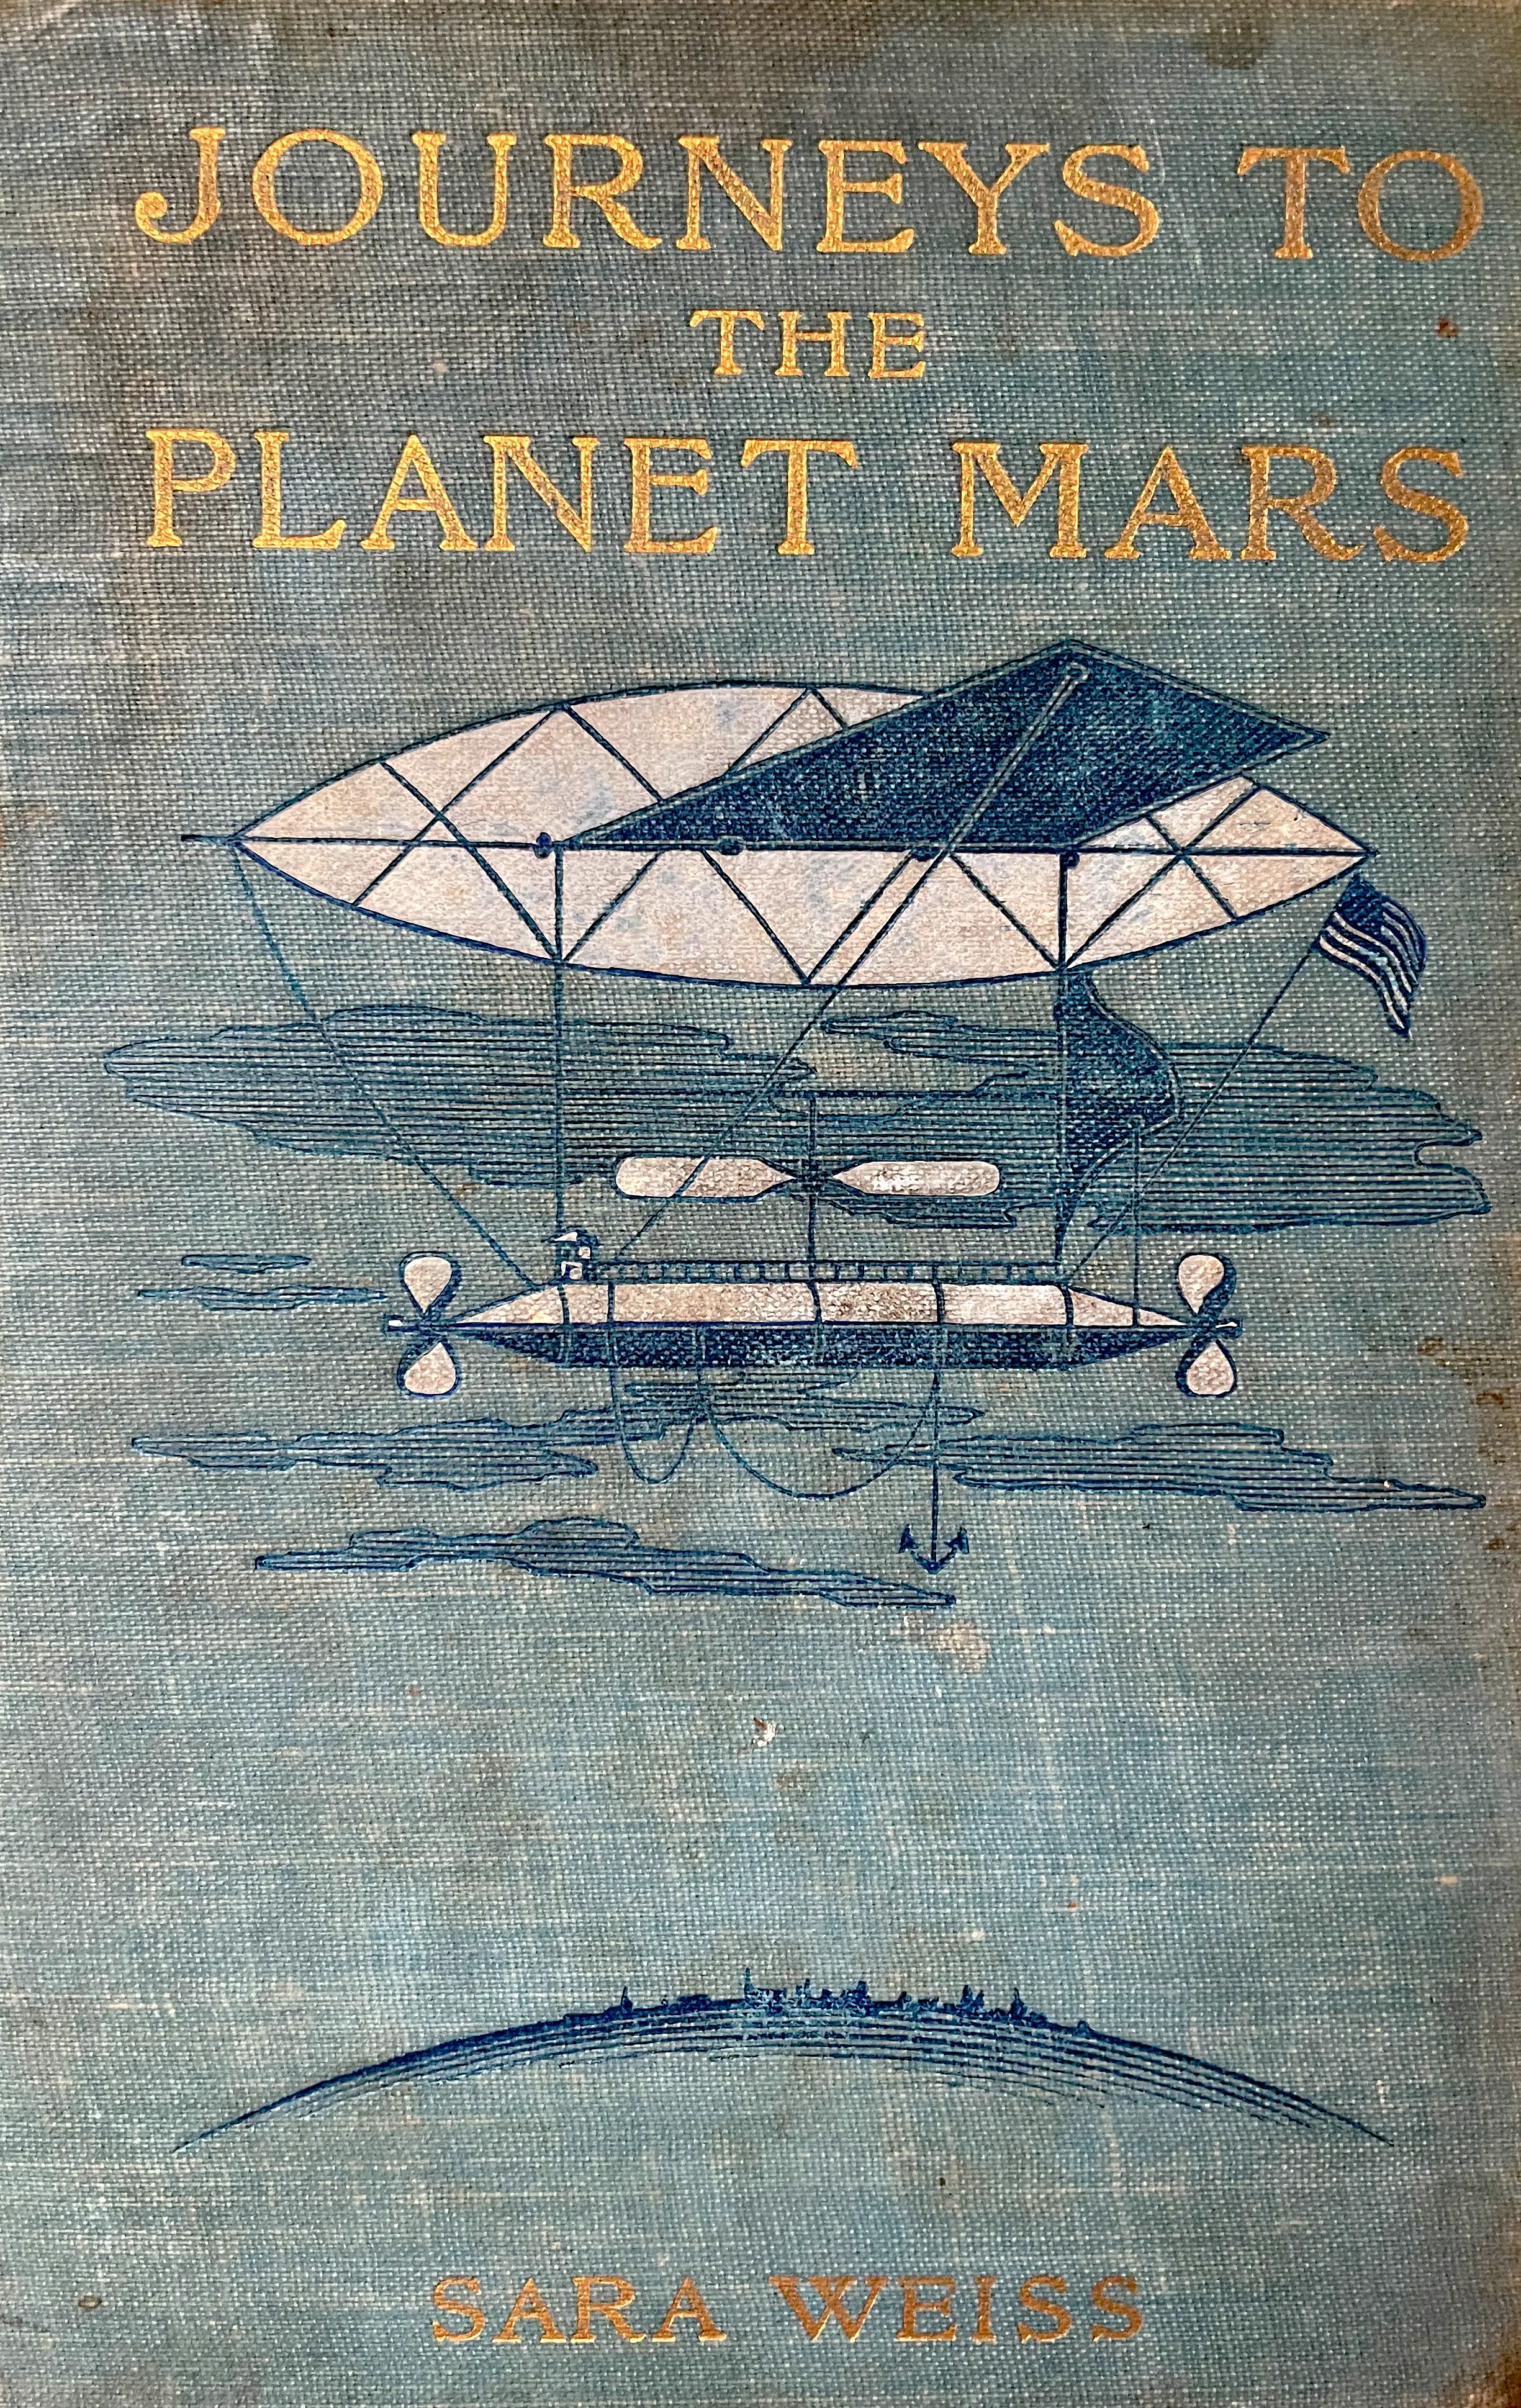 First edition cover of Journeys to the Planet Mars,  personal collection